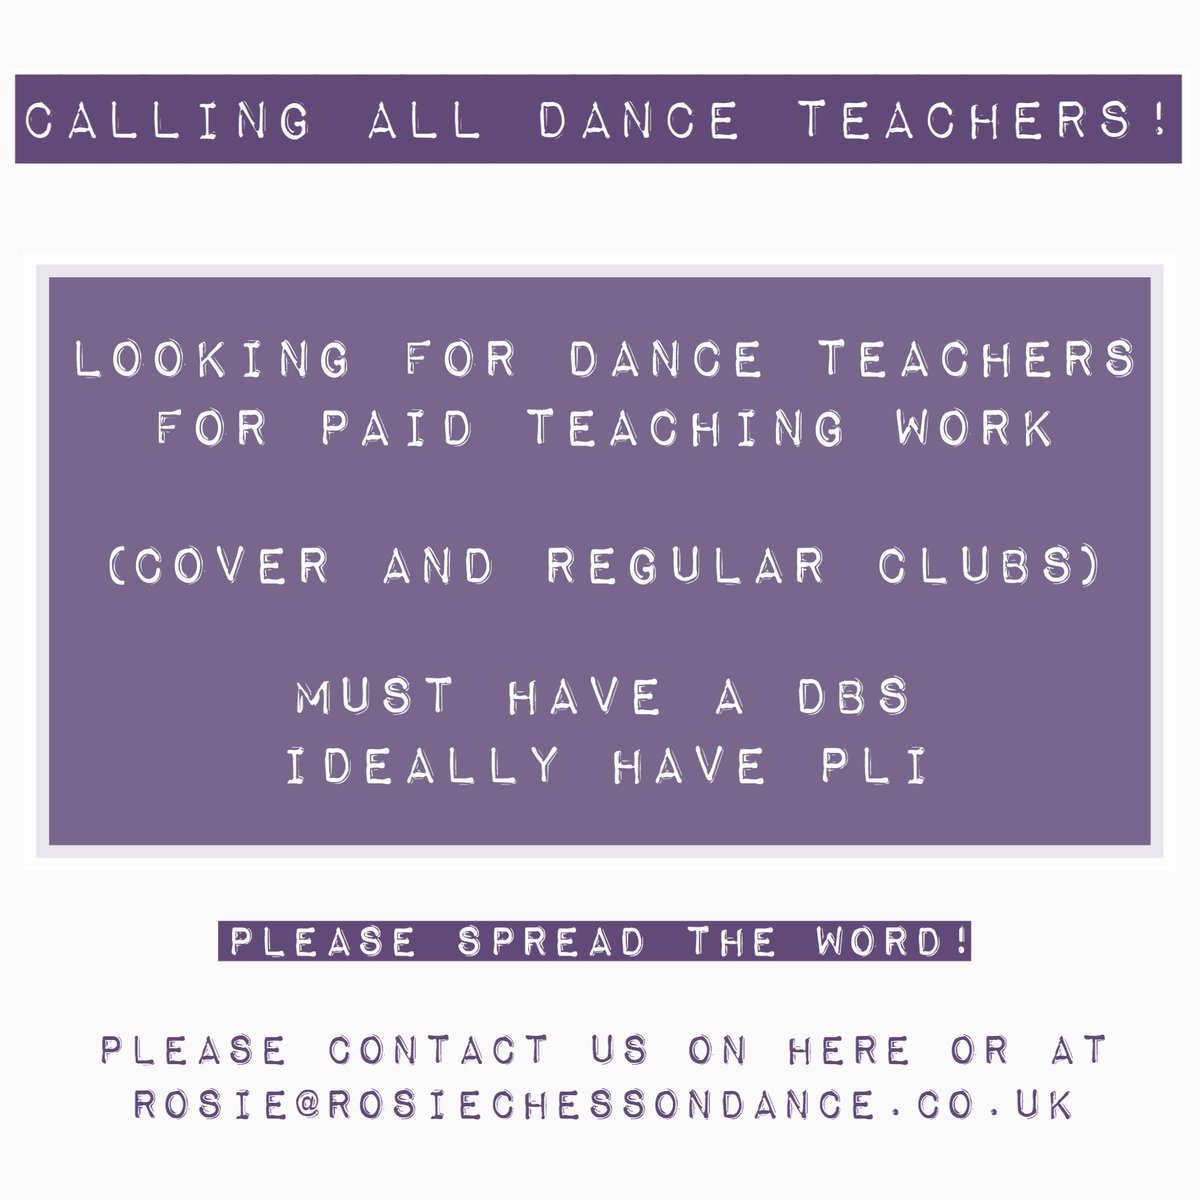 Looking for fantastic #Danceteachers for #paidopportunities teaching cover as well as weekly classes. If you are interested, are reliable & have a DBS please contact us for more info 🙌 Looking forward to hearing from you!
Rosie@rosiechessondance.co.uk
#teachingwork #dancejob